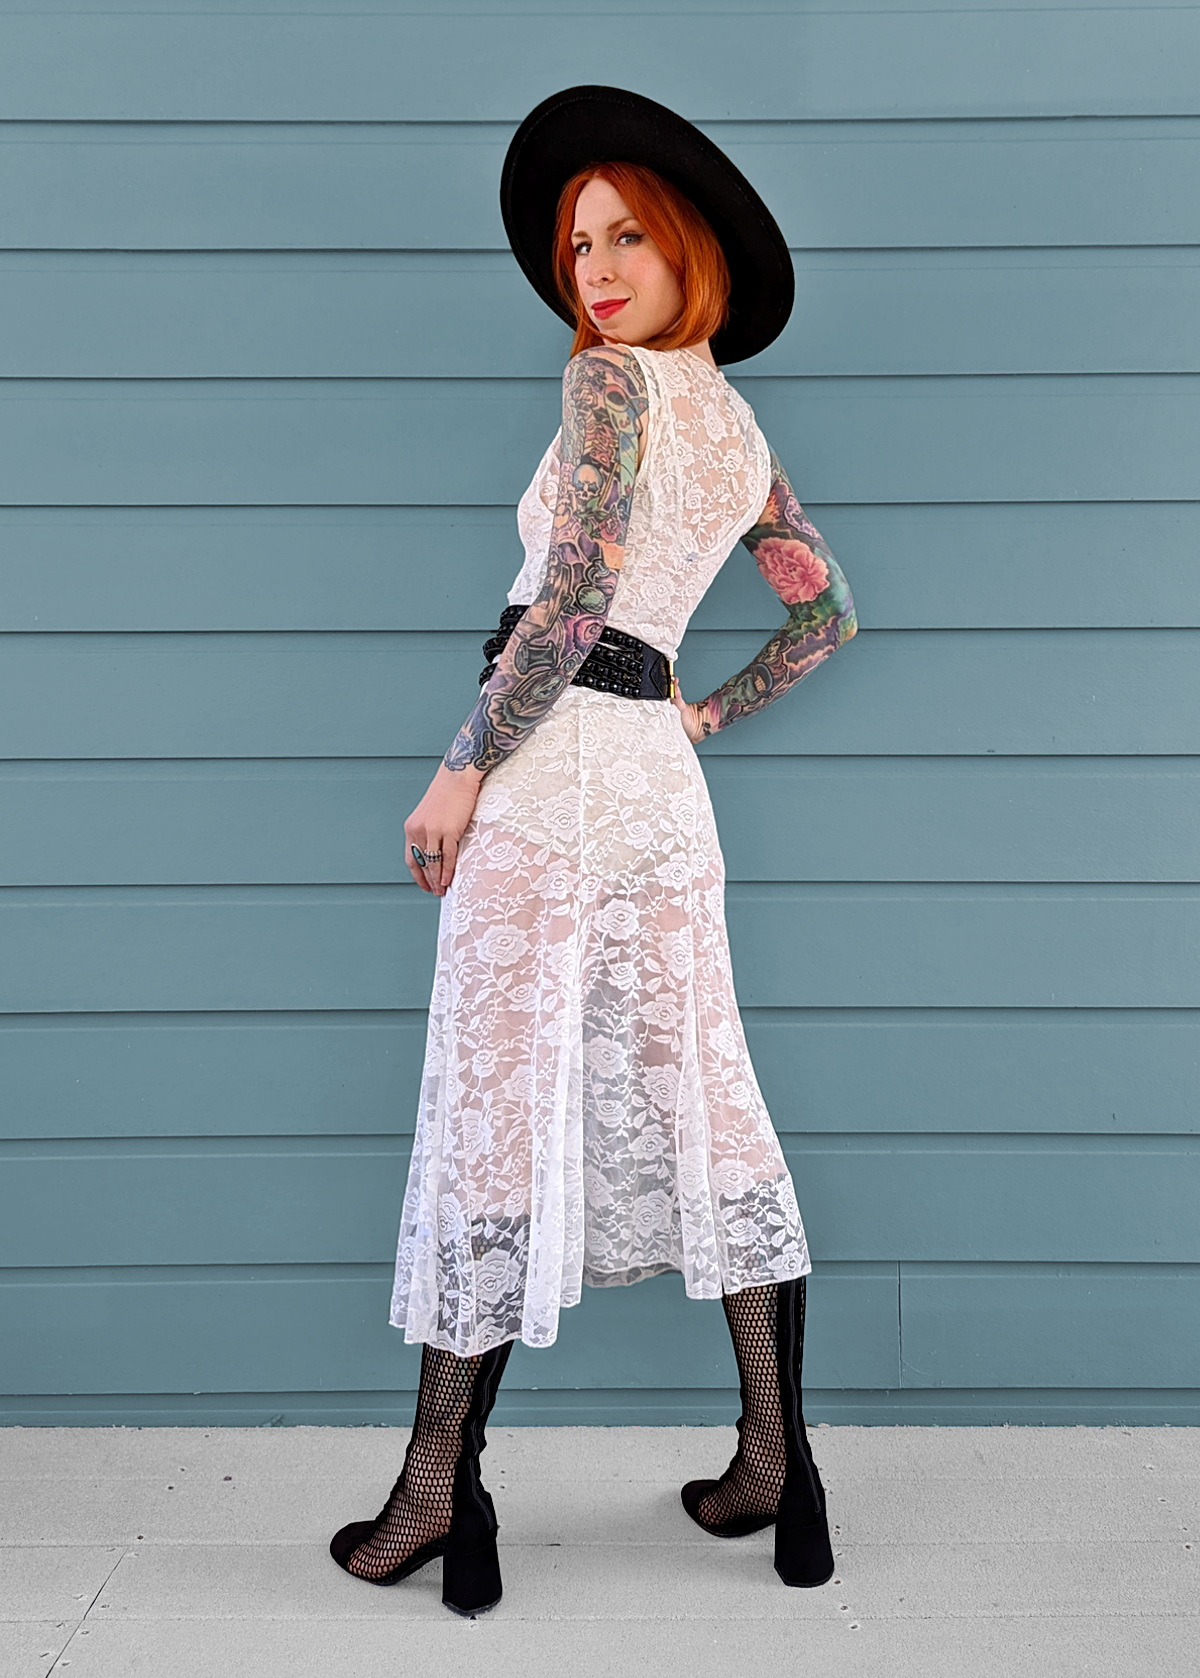 90s inspired sheer unlined white lace floral midi dress with sleeveless design and deep-v neckline by Motel Rocks